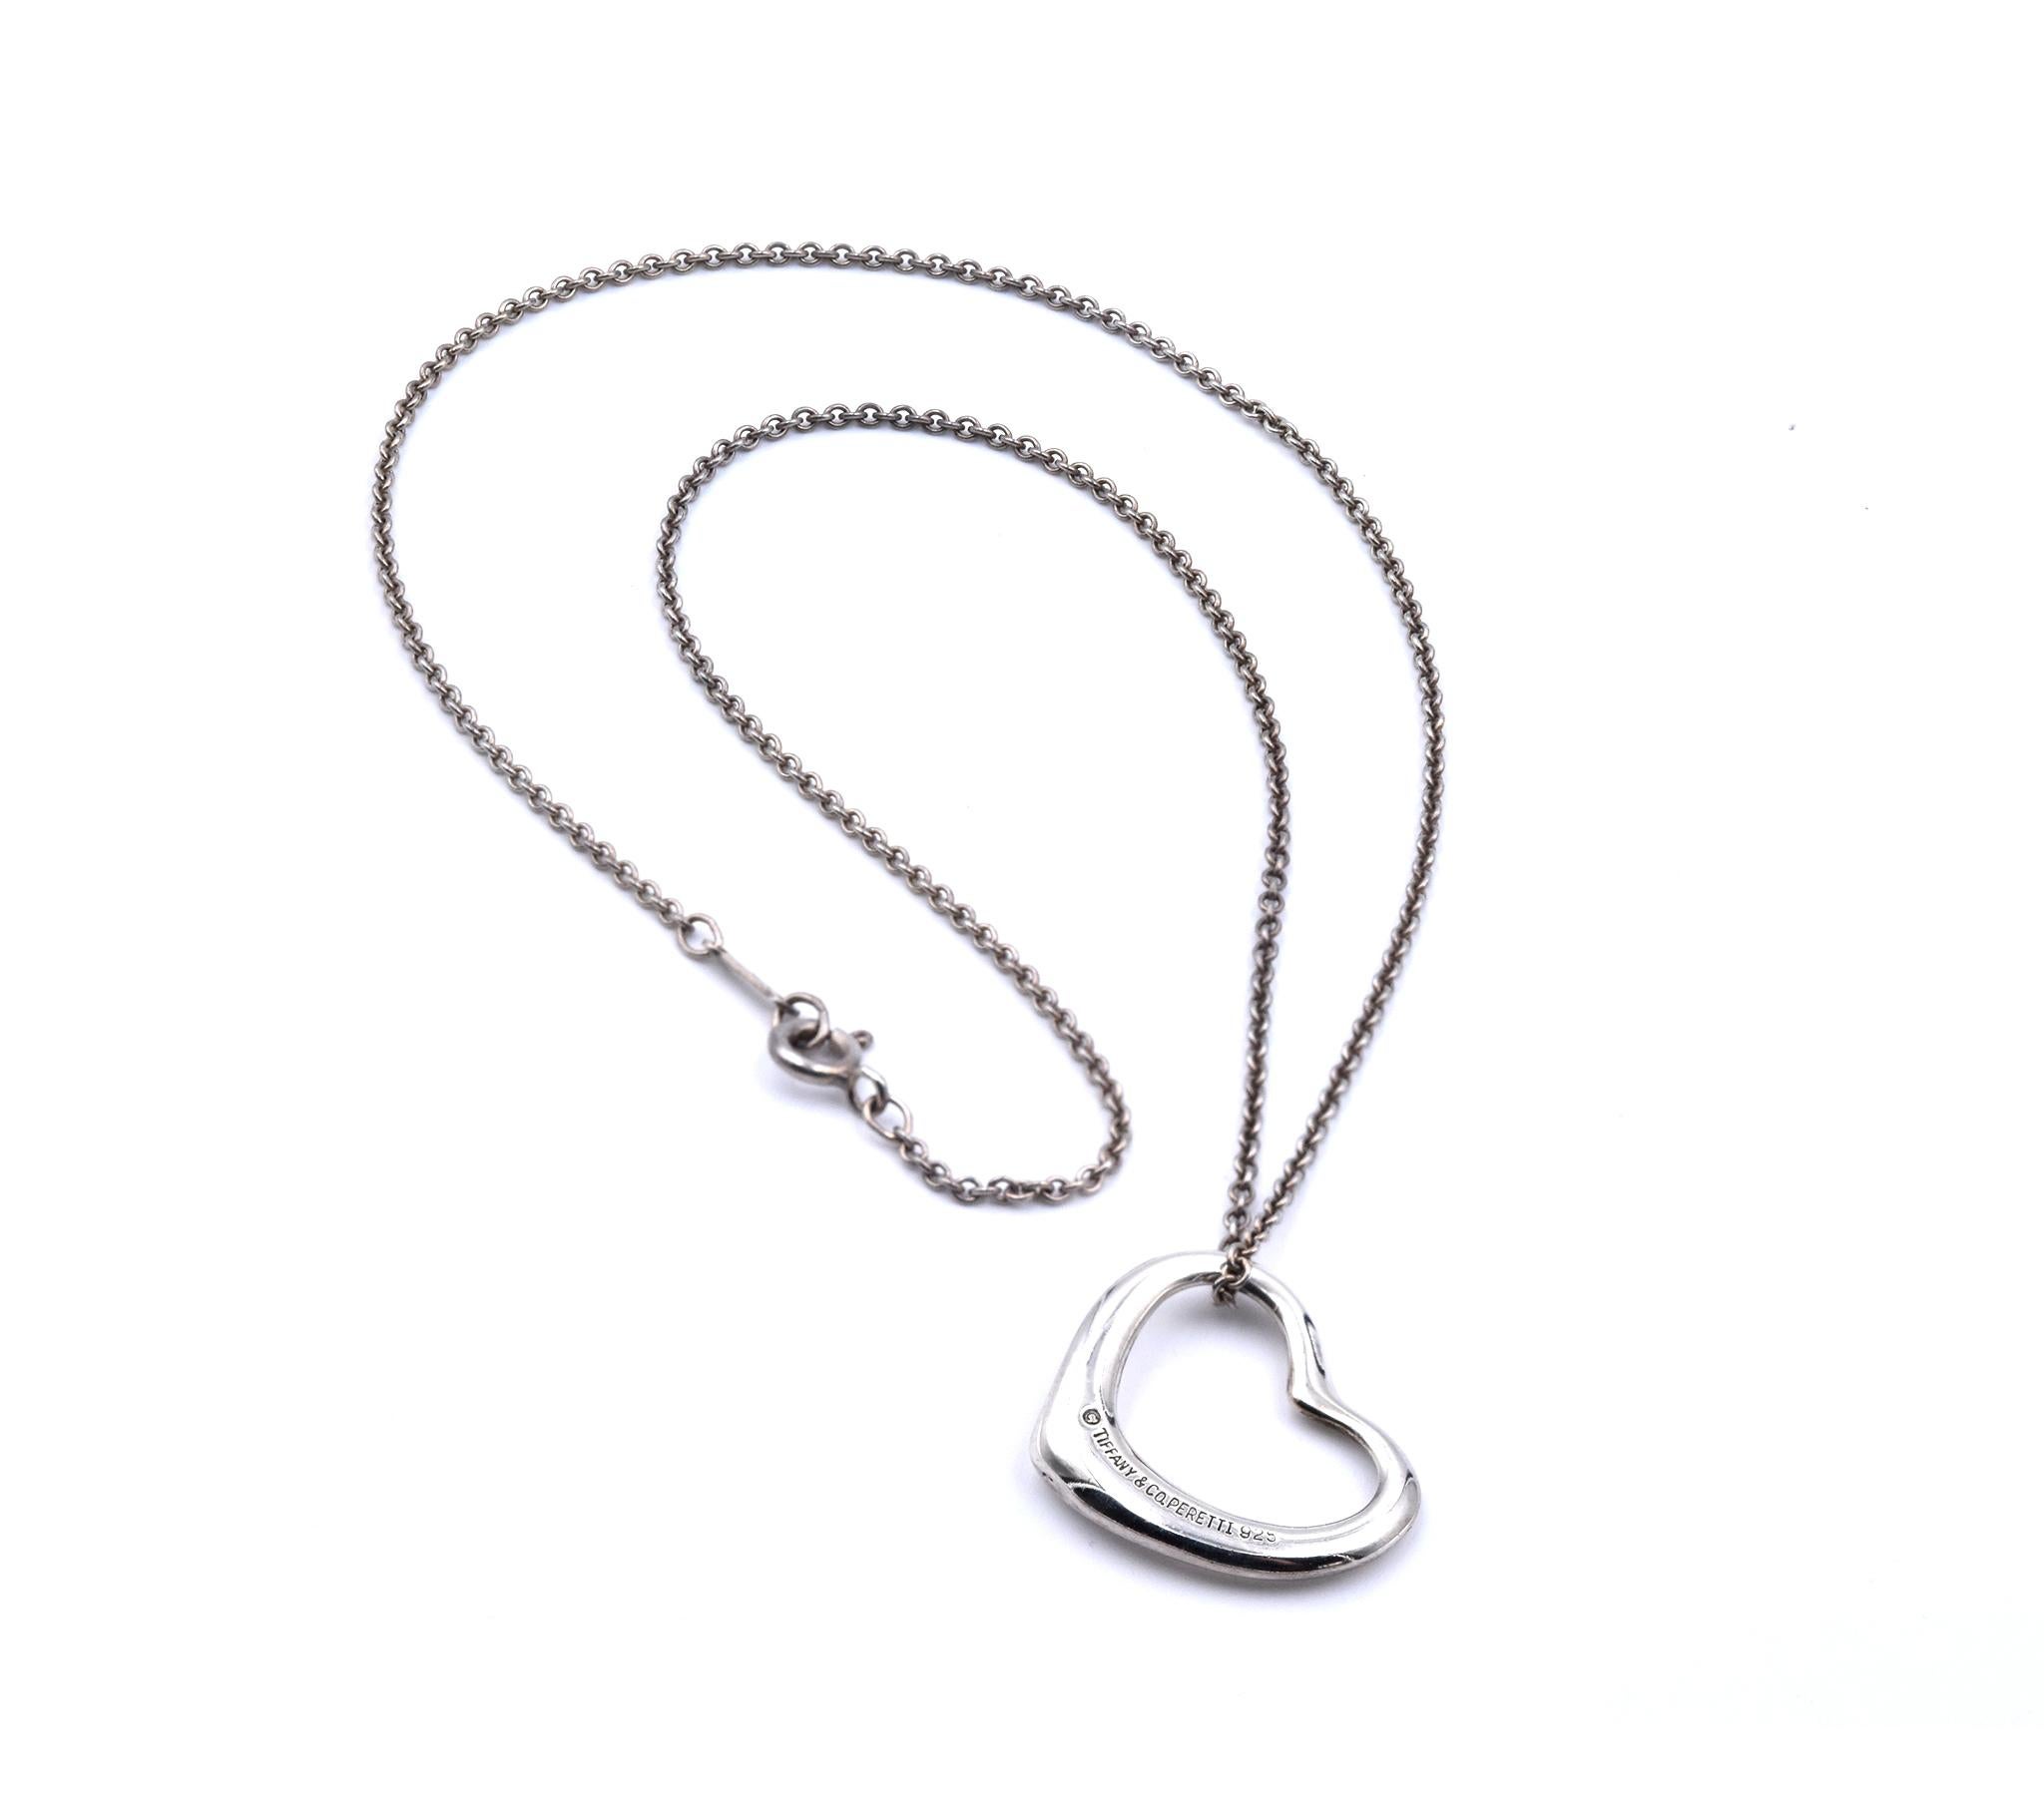 Designer: Tiffany & Co. / Elsa Peretti
Material: sterling silver
Dimensions: necklace measures 16-inches long
Weight: 5.61 grams
